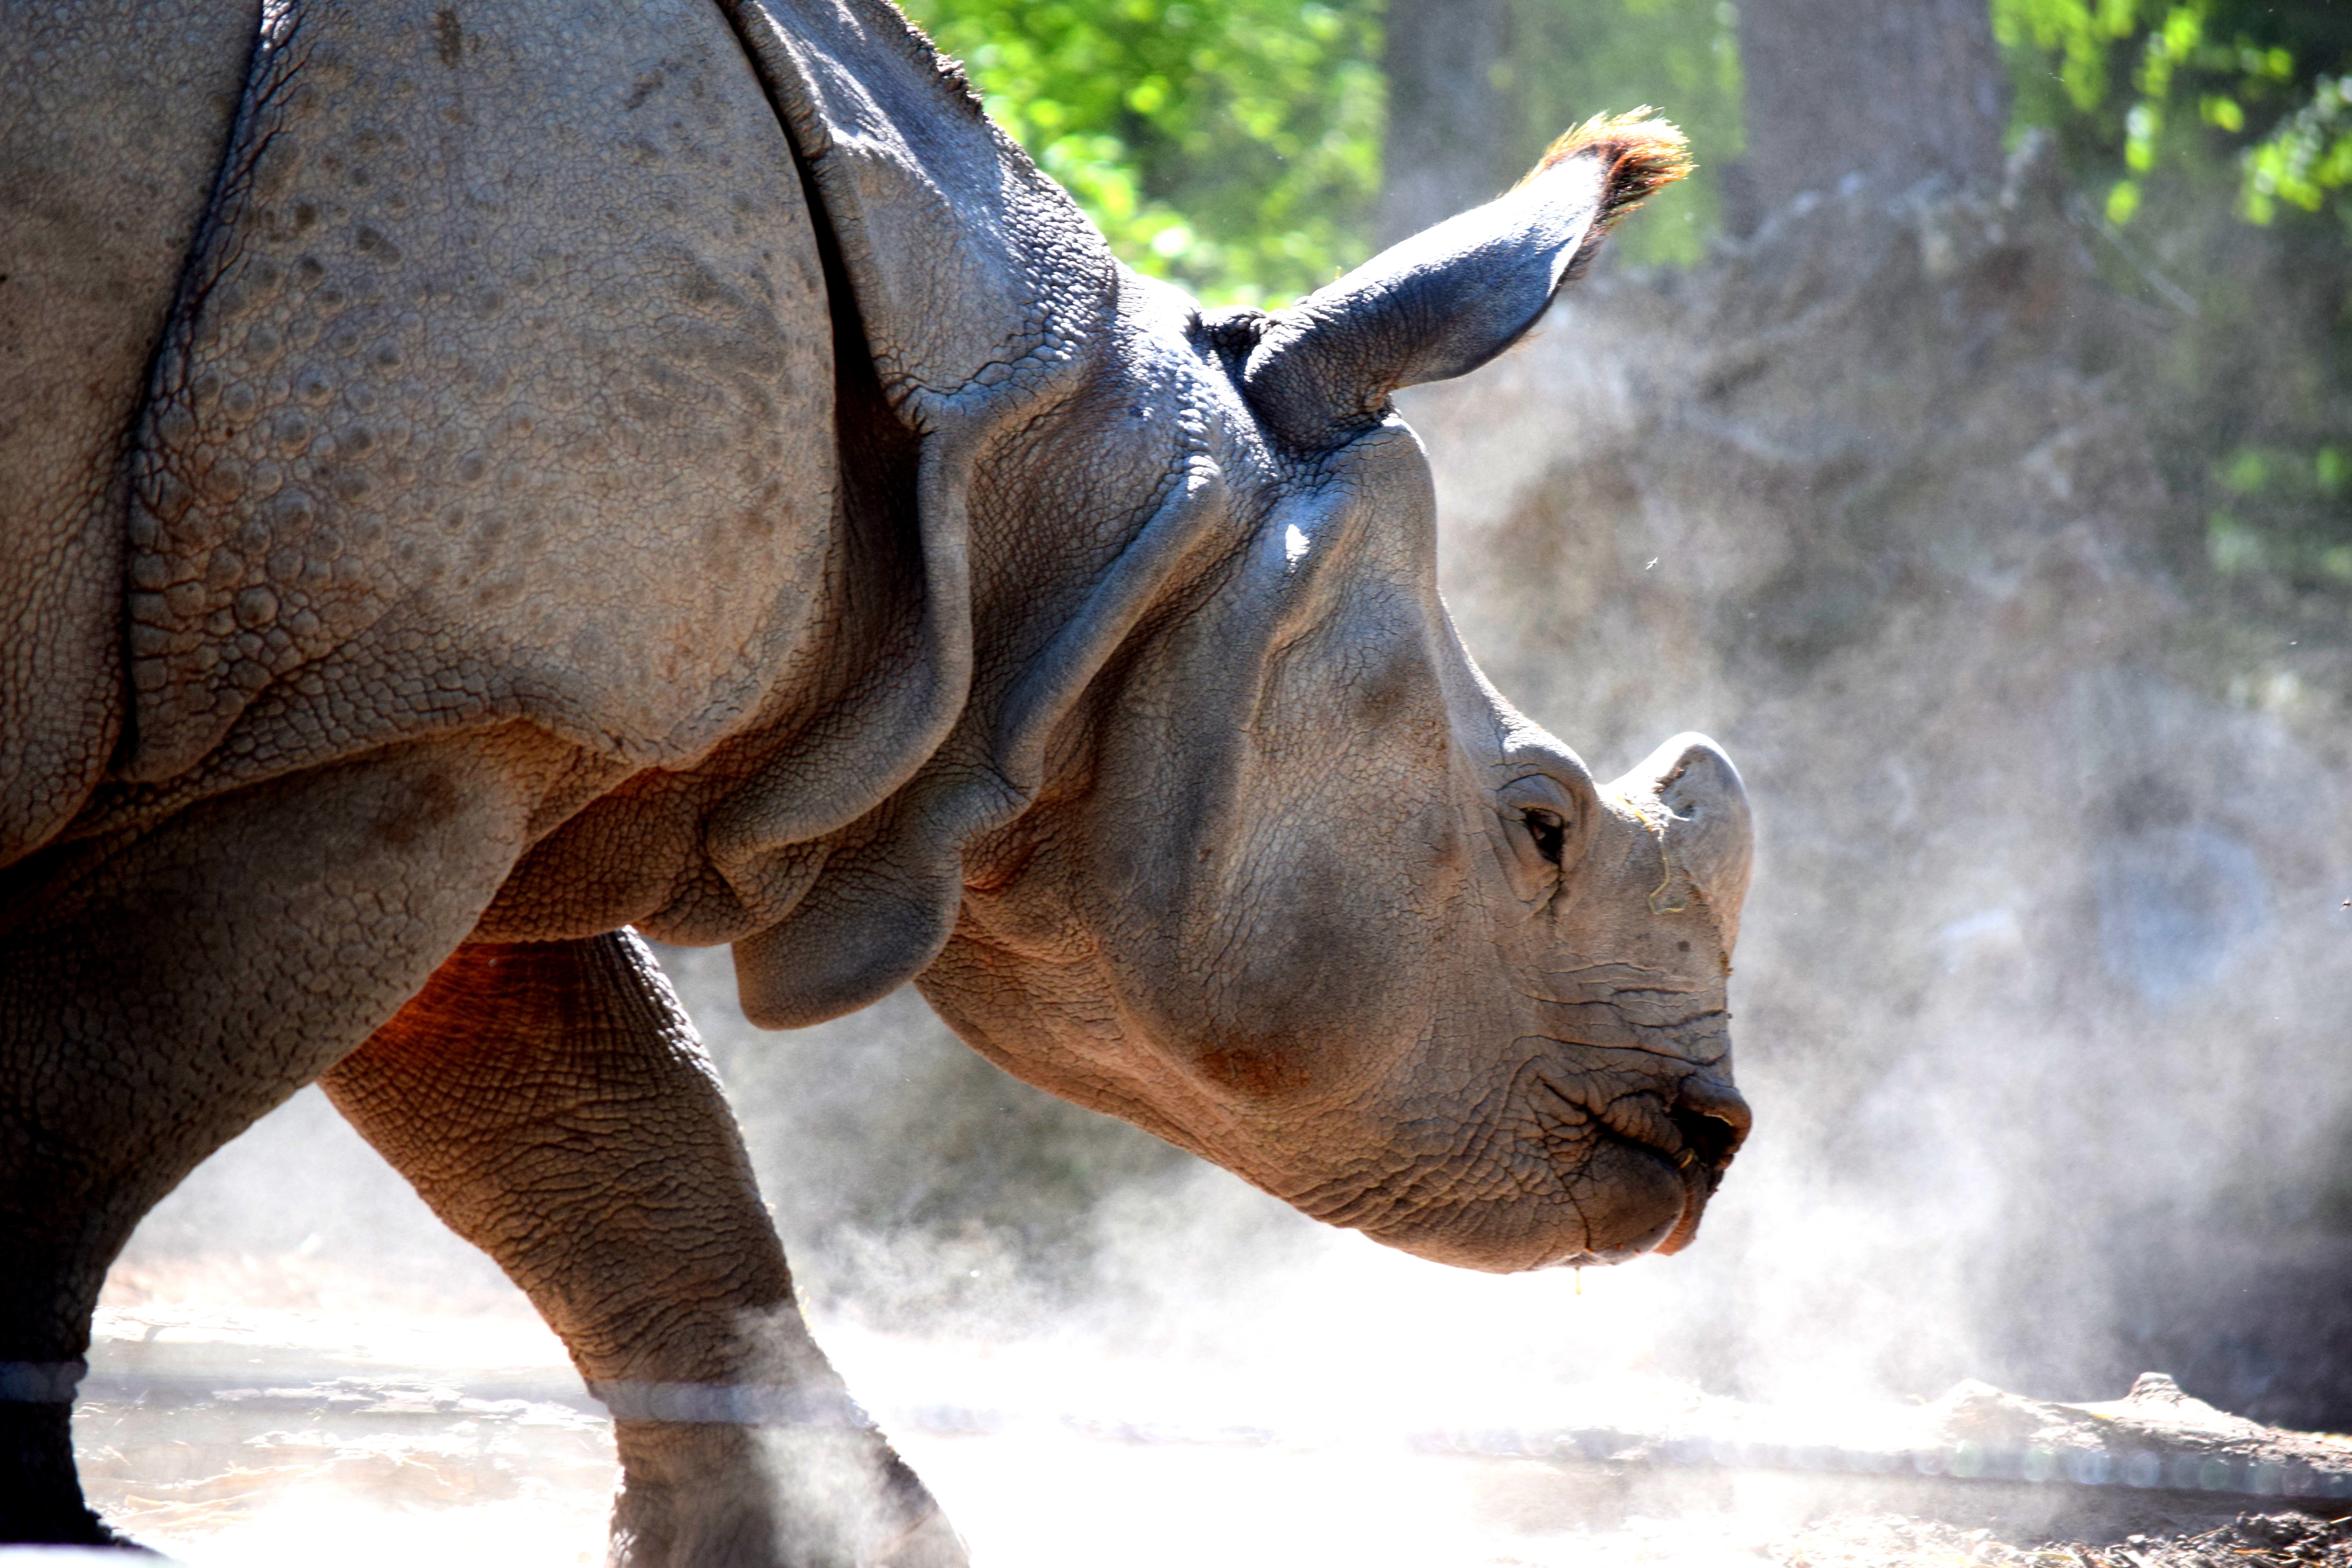 Importance of zoos for rhino